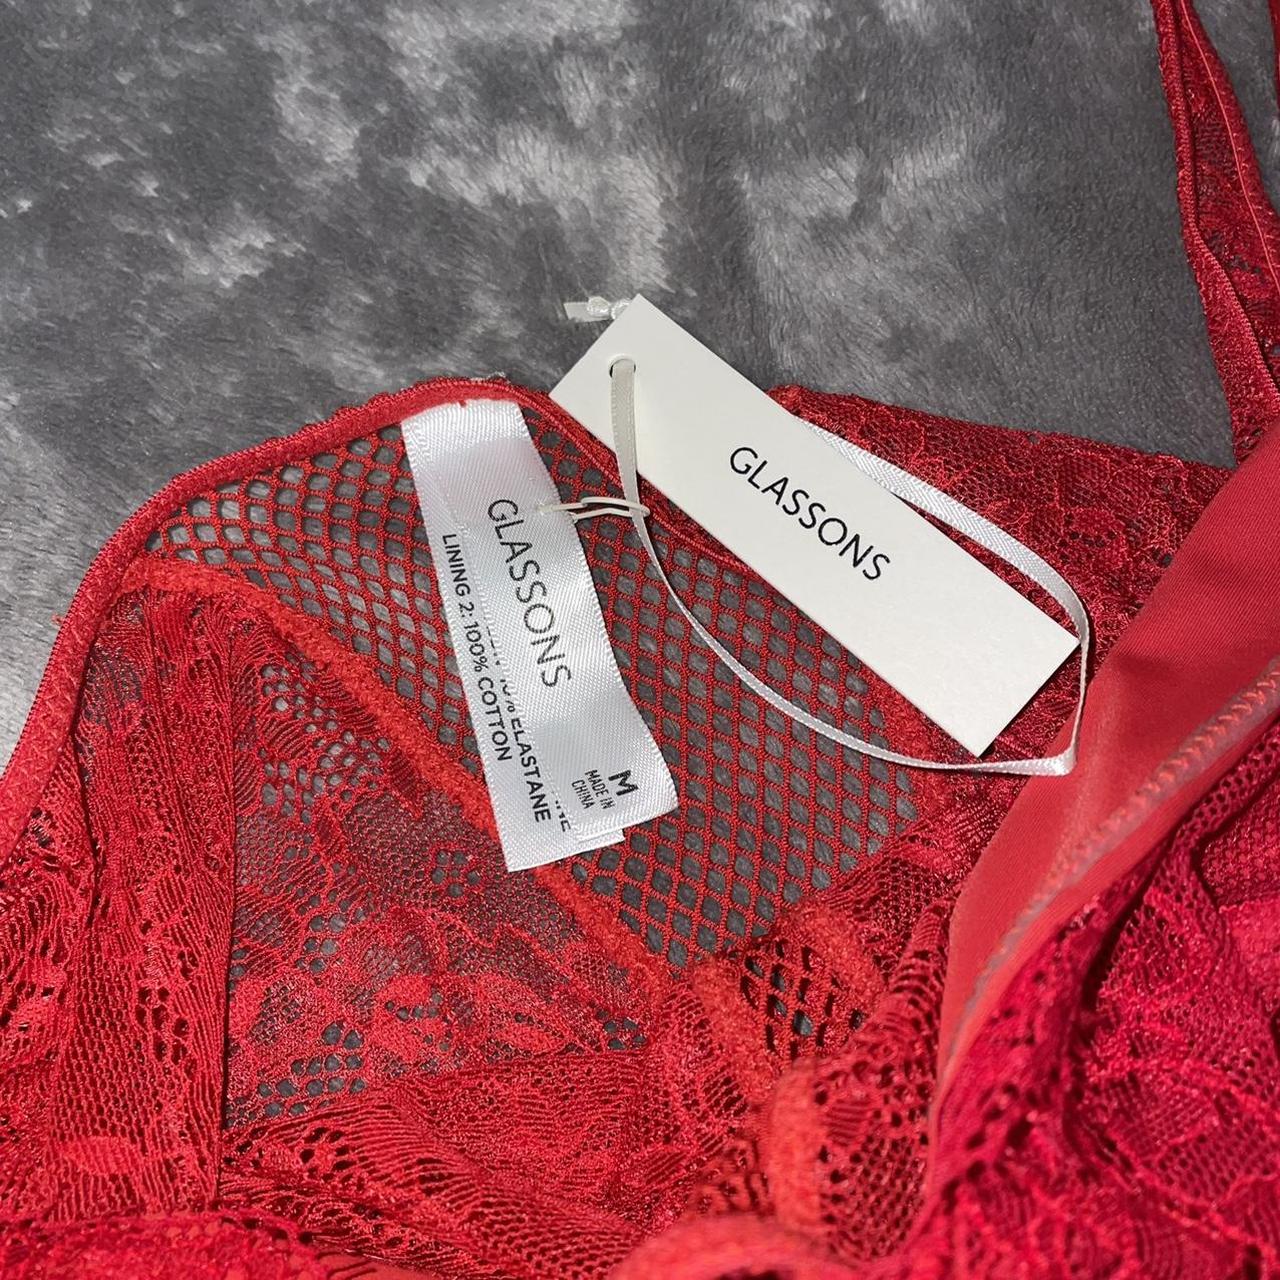 Glassons red lace bodysuit ️ 💋Size M/10 💋Brand new... - Depop